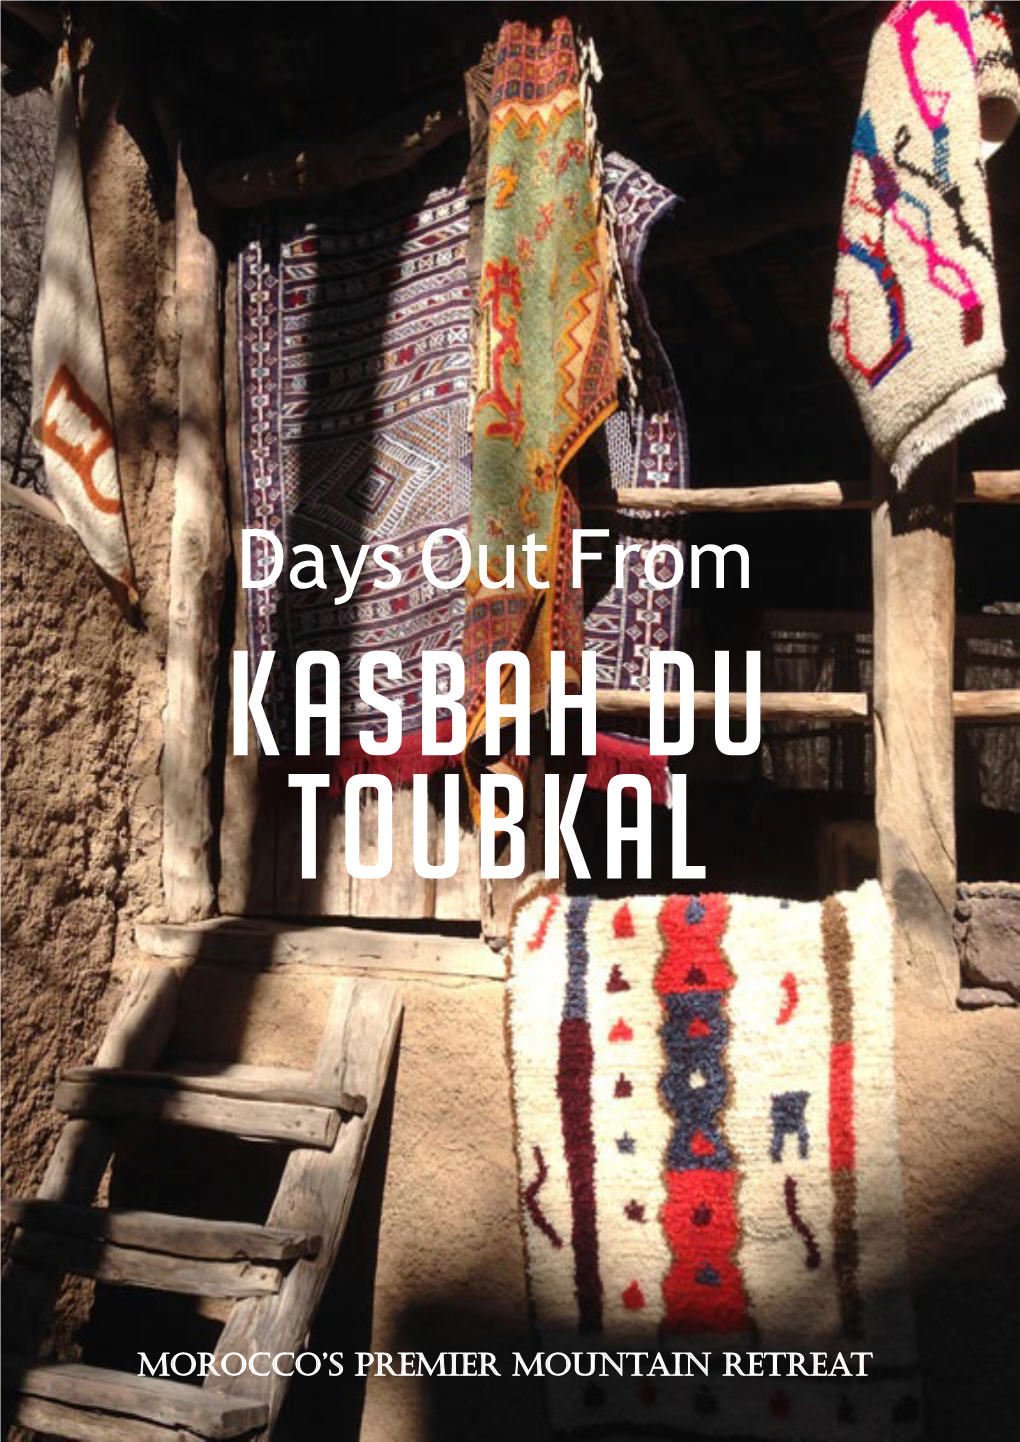 Days out from KASBAH Du TOUBKAL